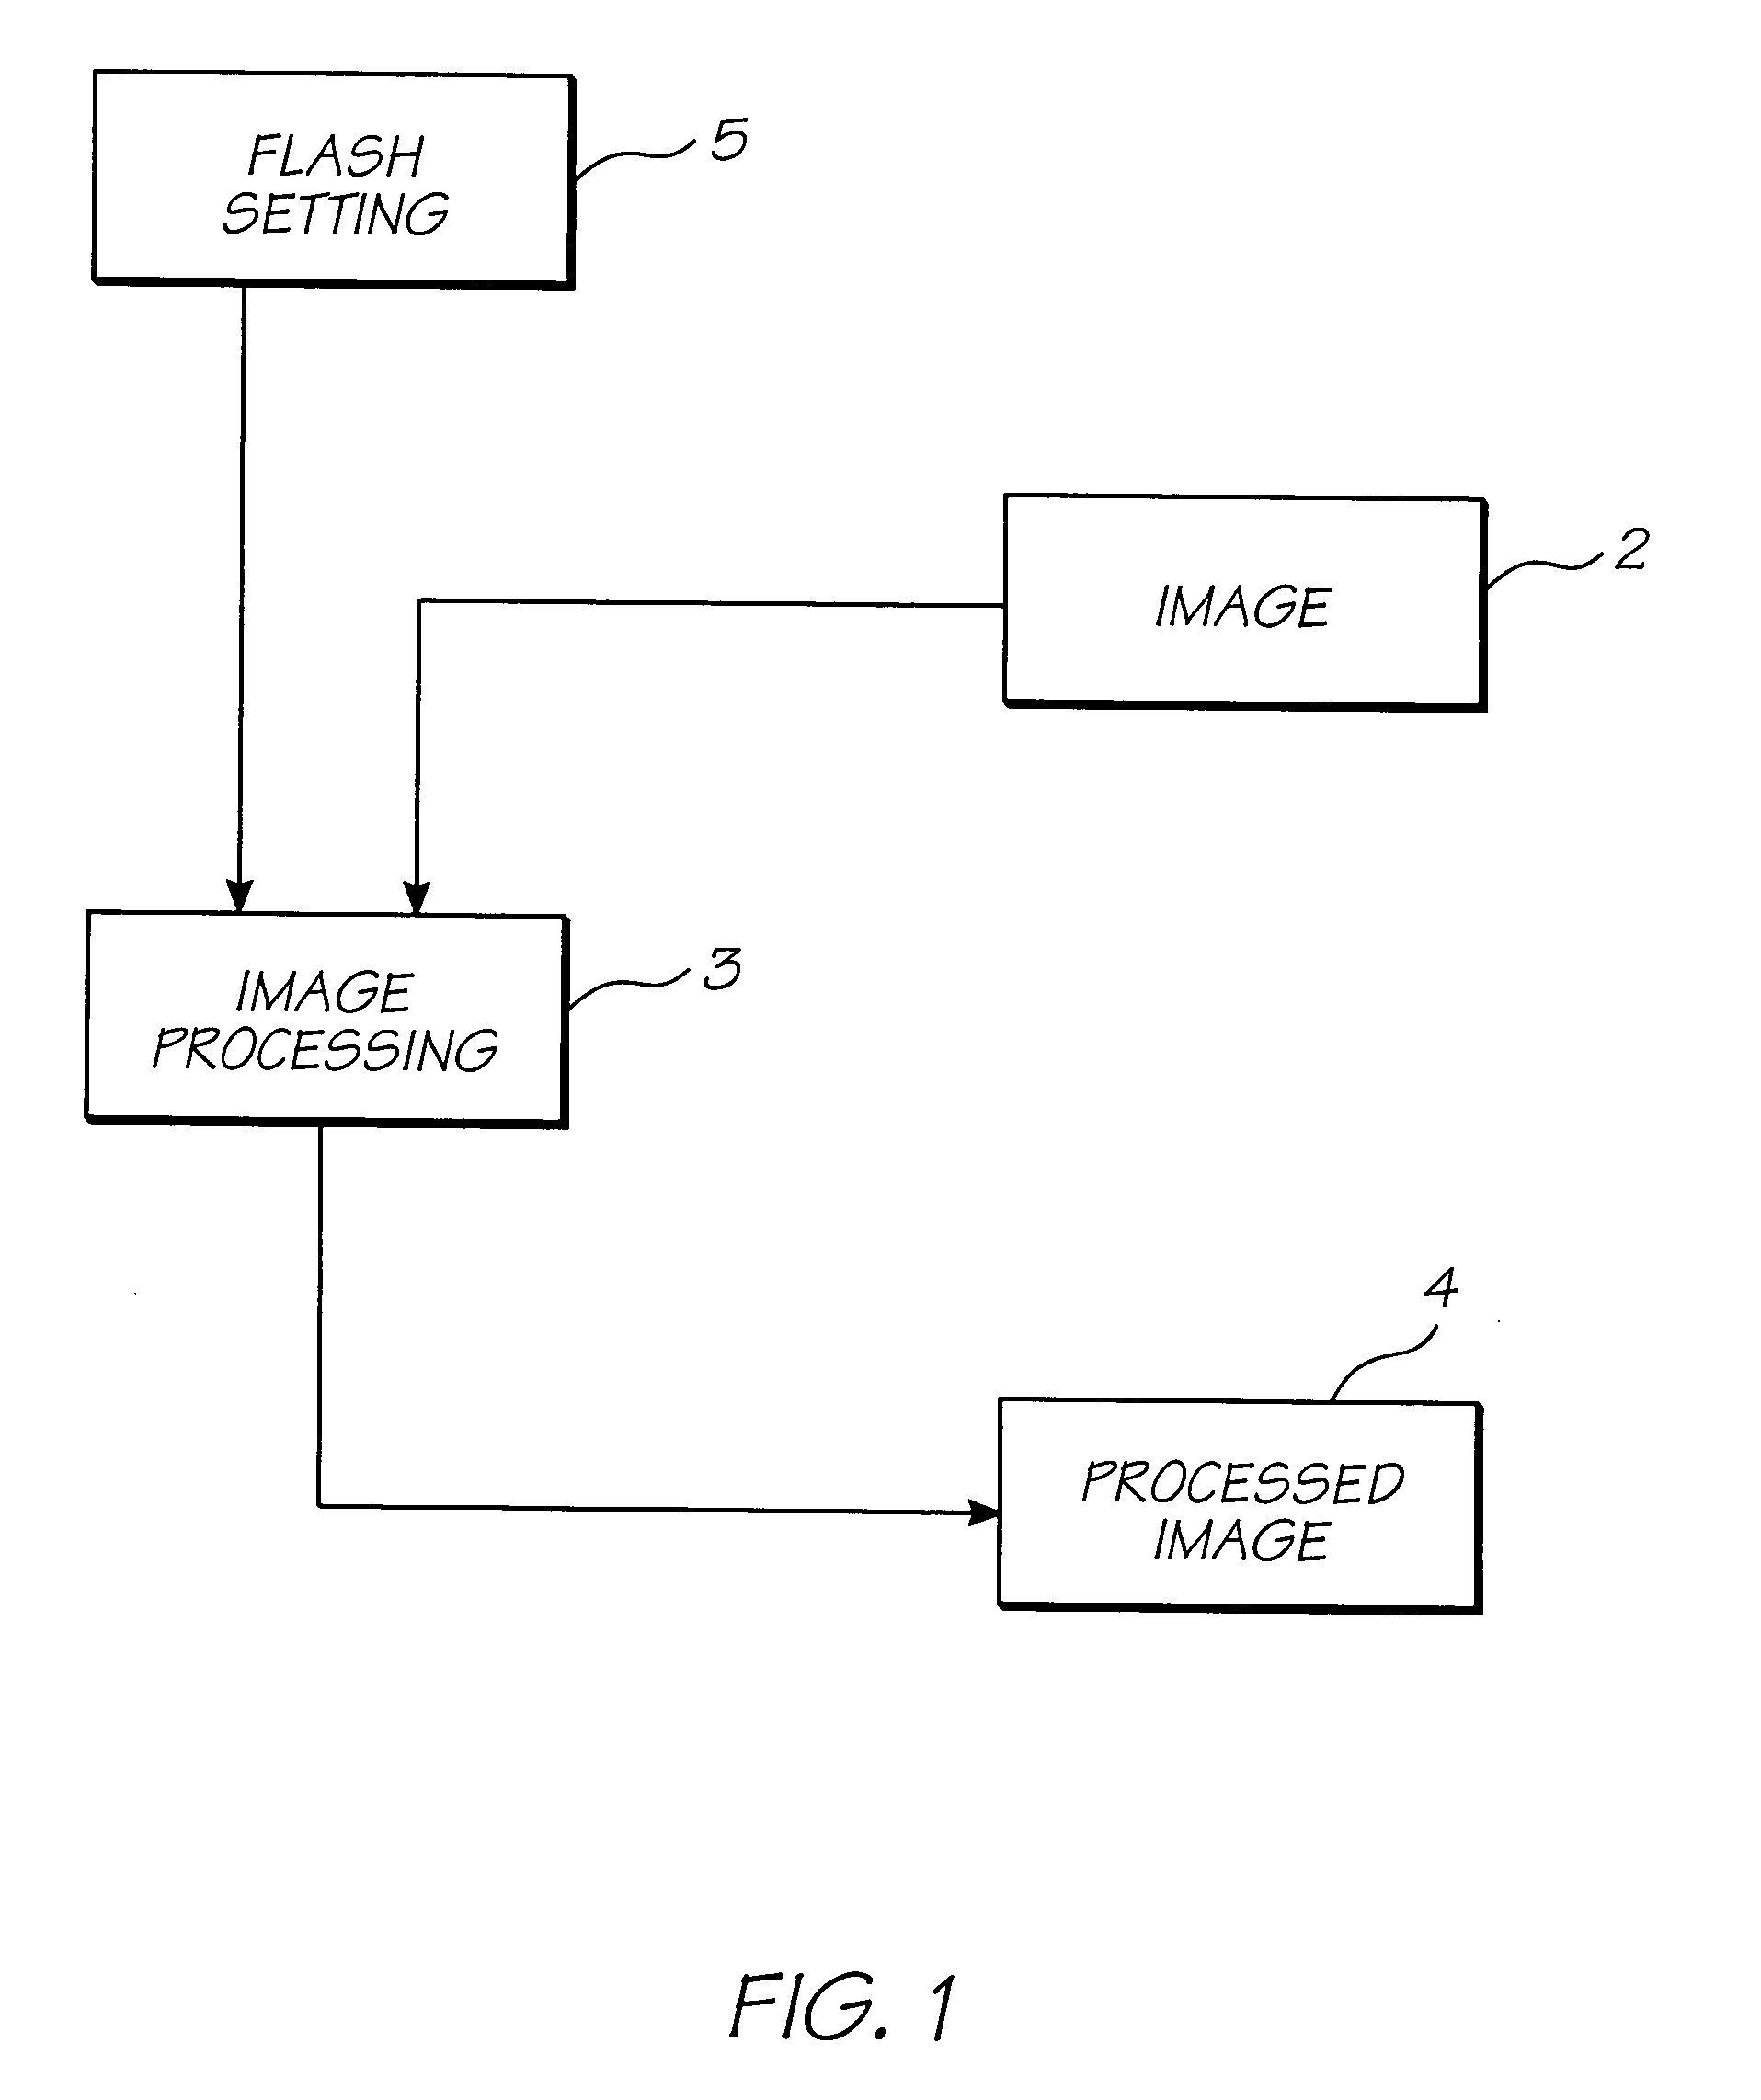 Method of processing digital image to correct for flash effects